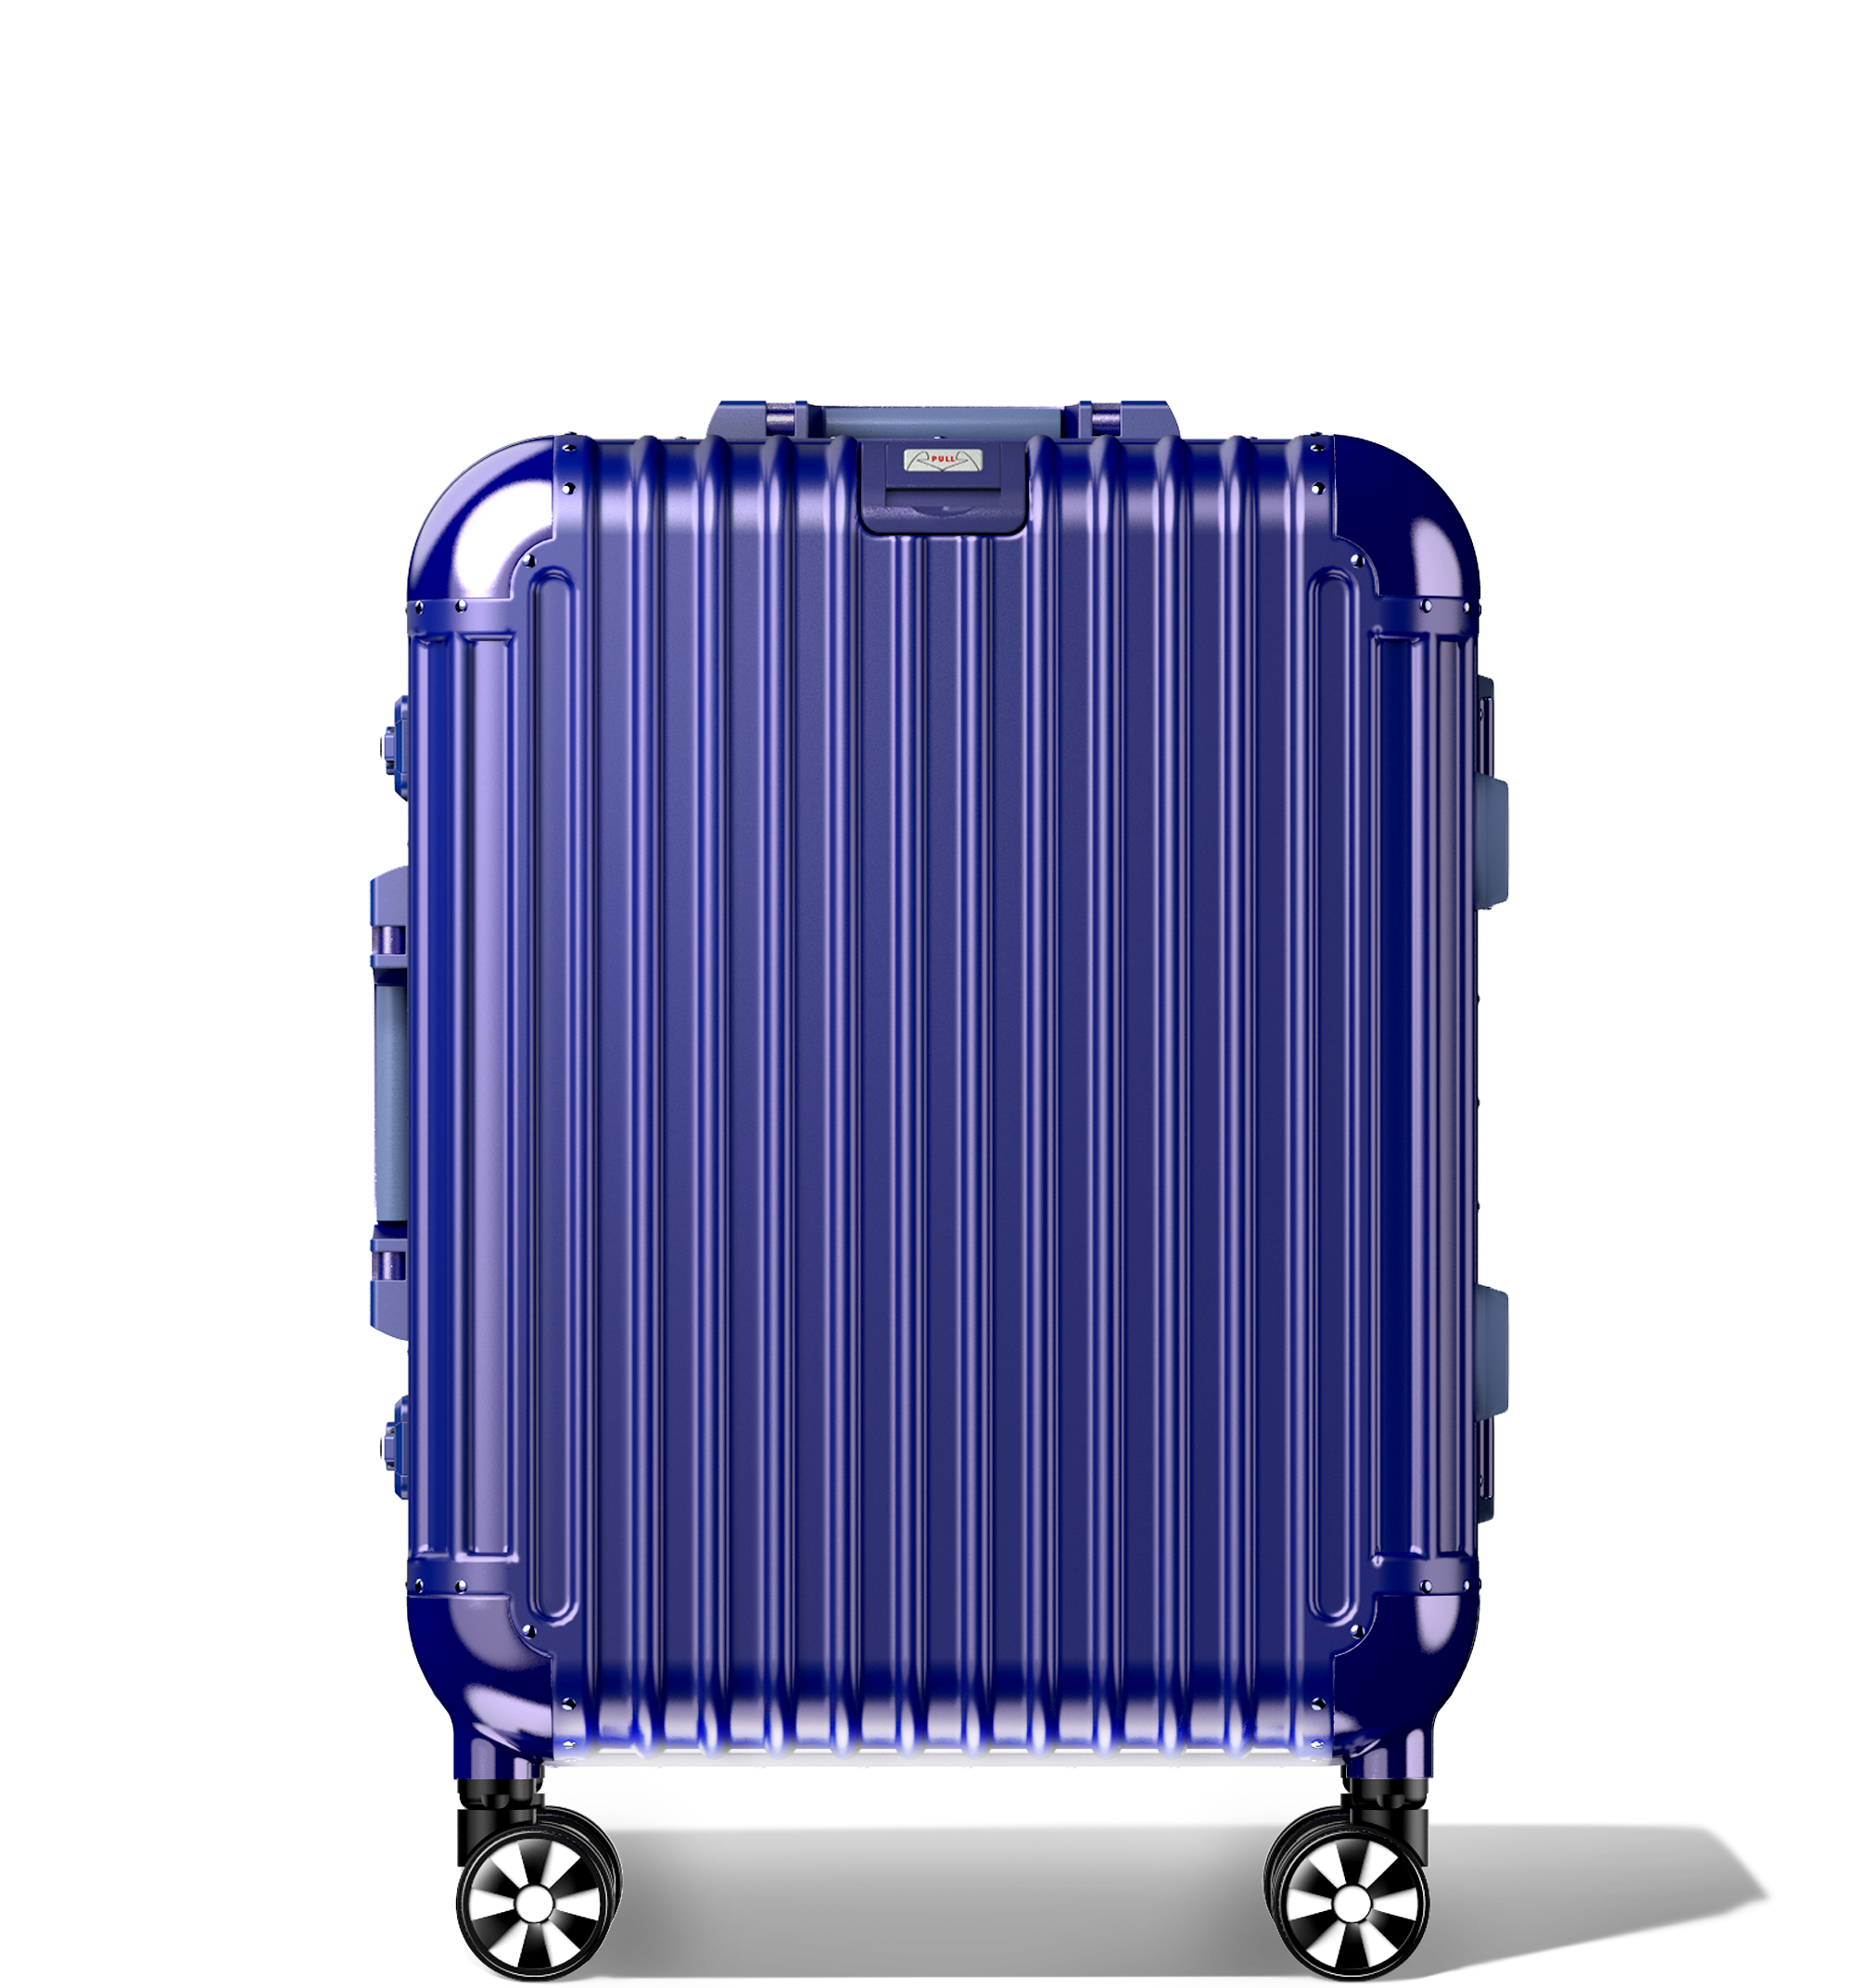 A Blue metallic Check-In 60/25 aluminium hard-shell Luggage standing vertically, featuring a ribbed design, a branded logo plate at the top, reinforced corner protectors, and four multi-directional spinner wheels, displayed against a white background.